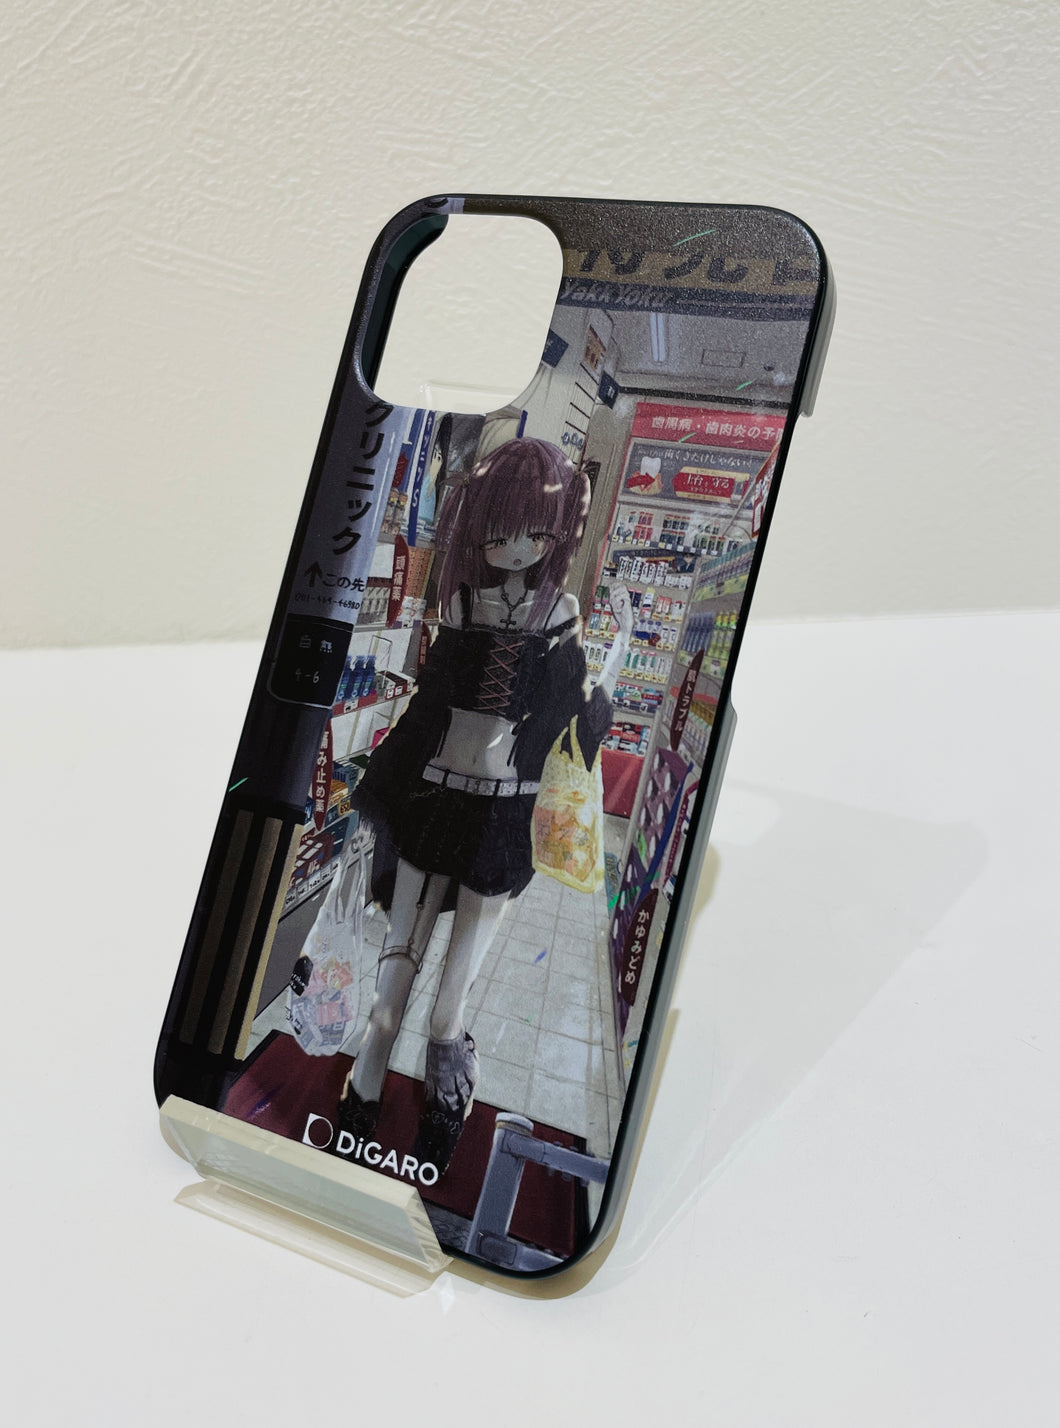 "I want to quickly become okay." Shina DiGARO Limited Smartphone Case -Xperia Series-